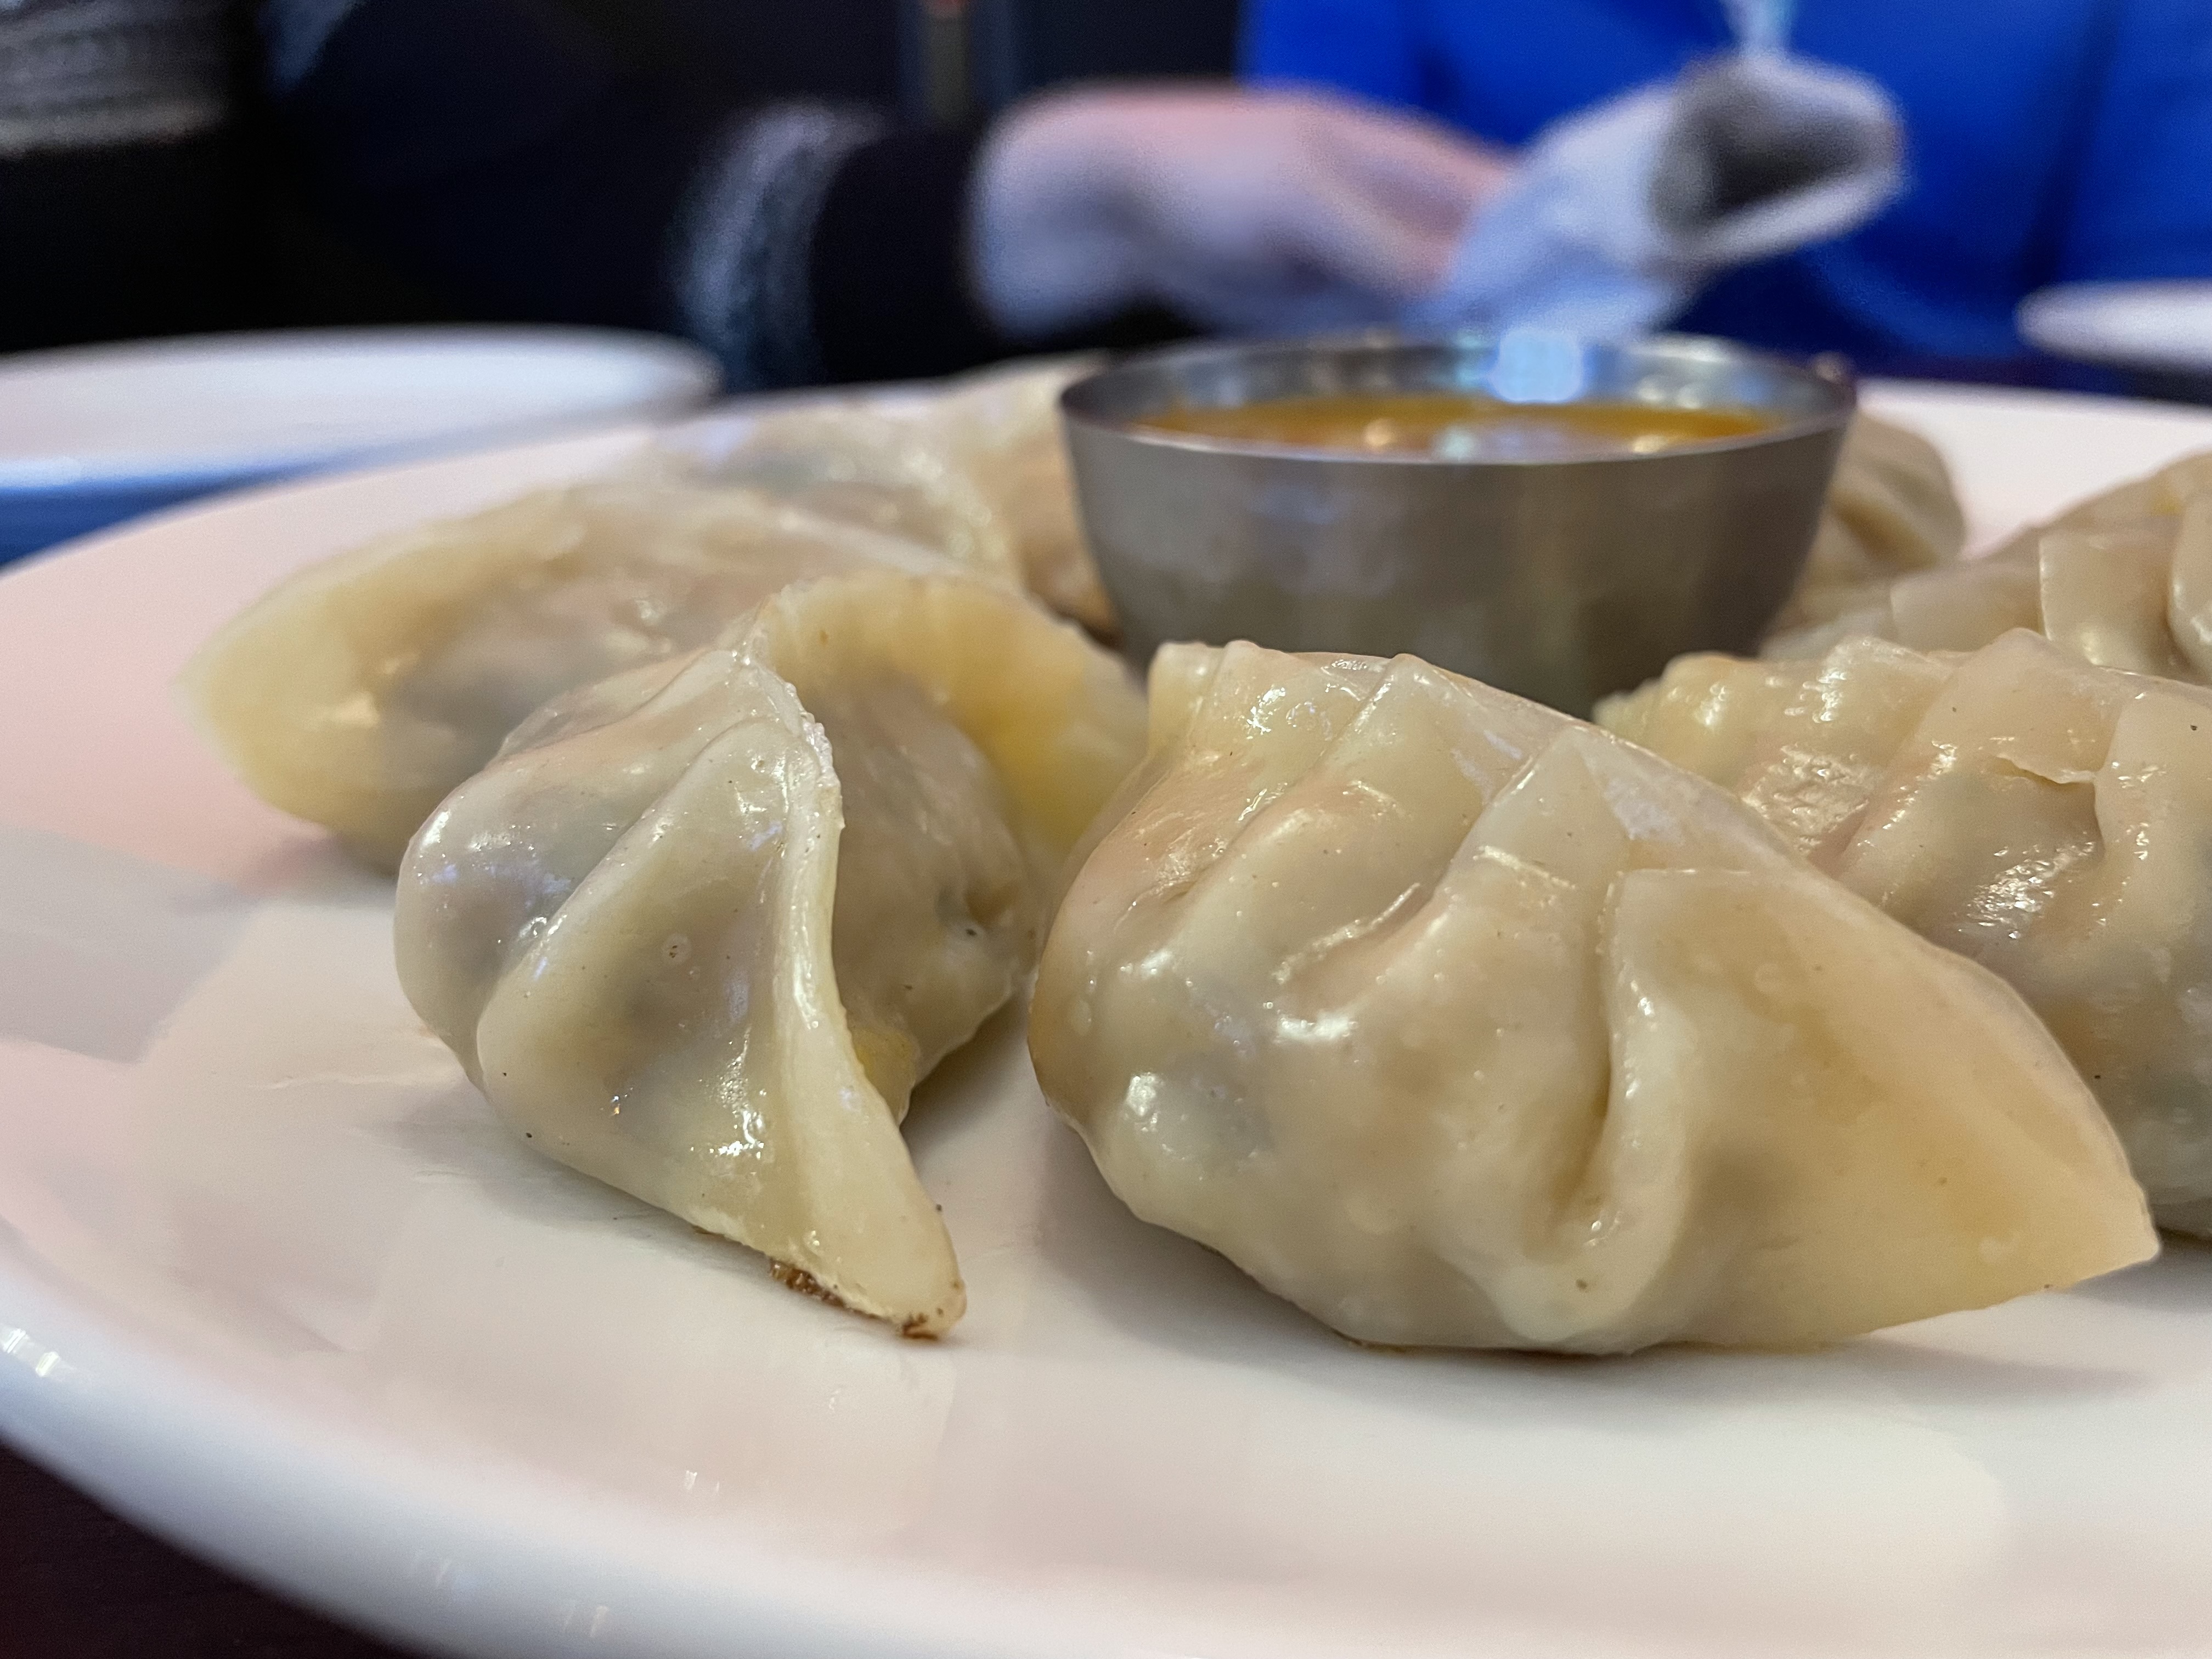 The kothey momos are a signature Nepalese dish found across the country